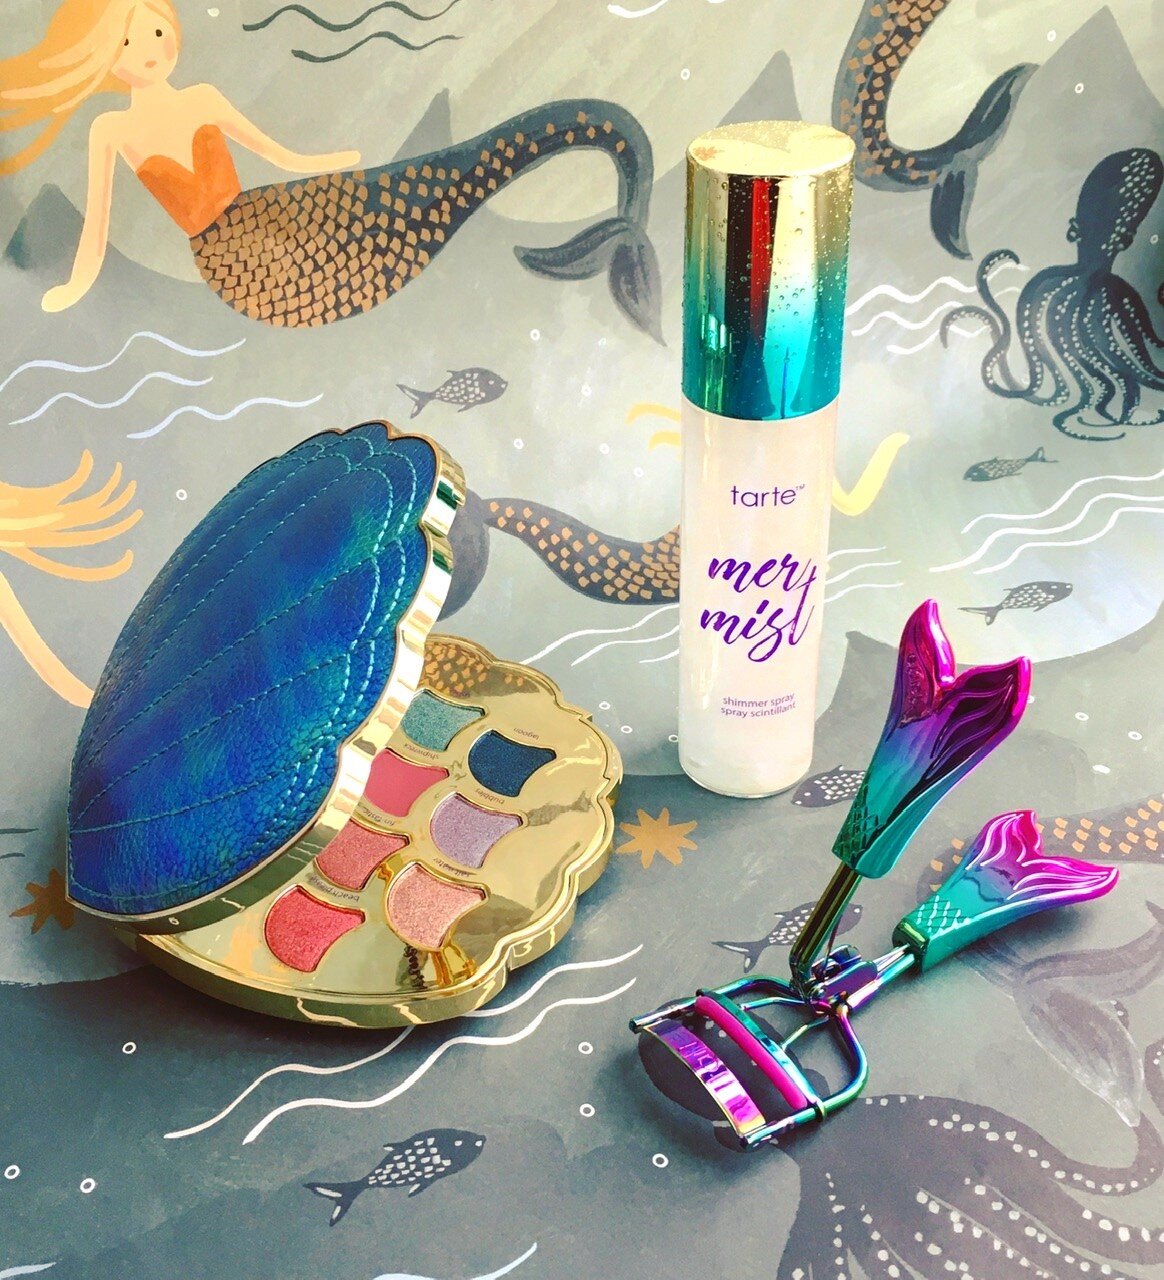   Be a Mermaid and Make Waves Eyeshadow Palette, Facial Mist and Eyelash Curler   Tarte Spring 2018   Eager to jump on the mermaid bandwagon, in early 2018 Tarte released a rather uninspired mermaid collection consisting of a body mist, face and body